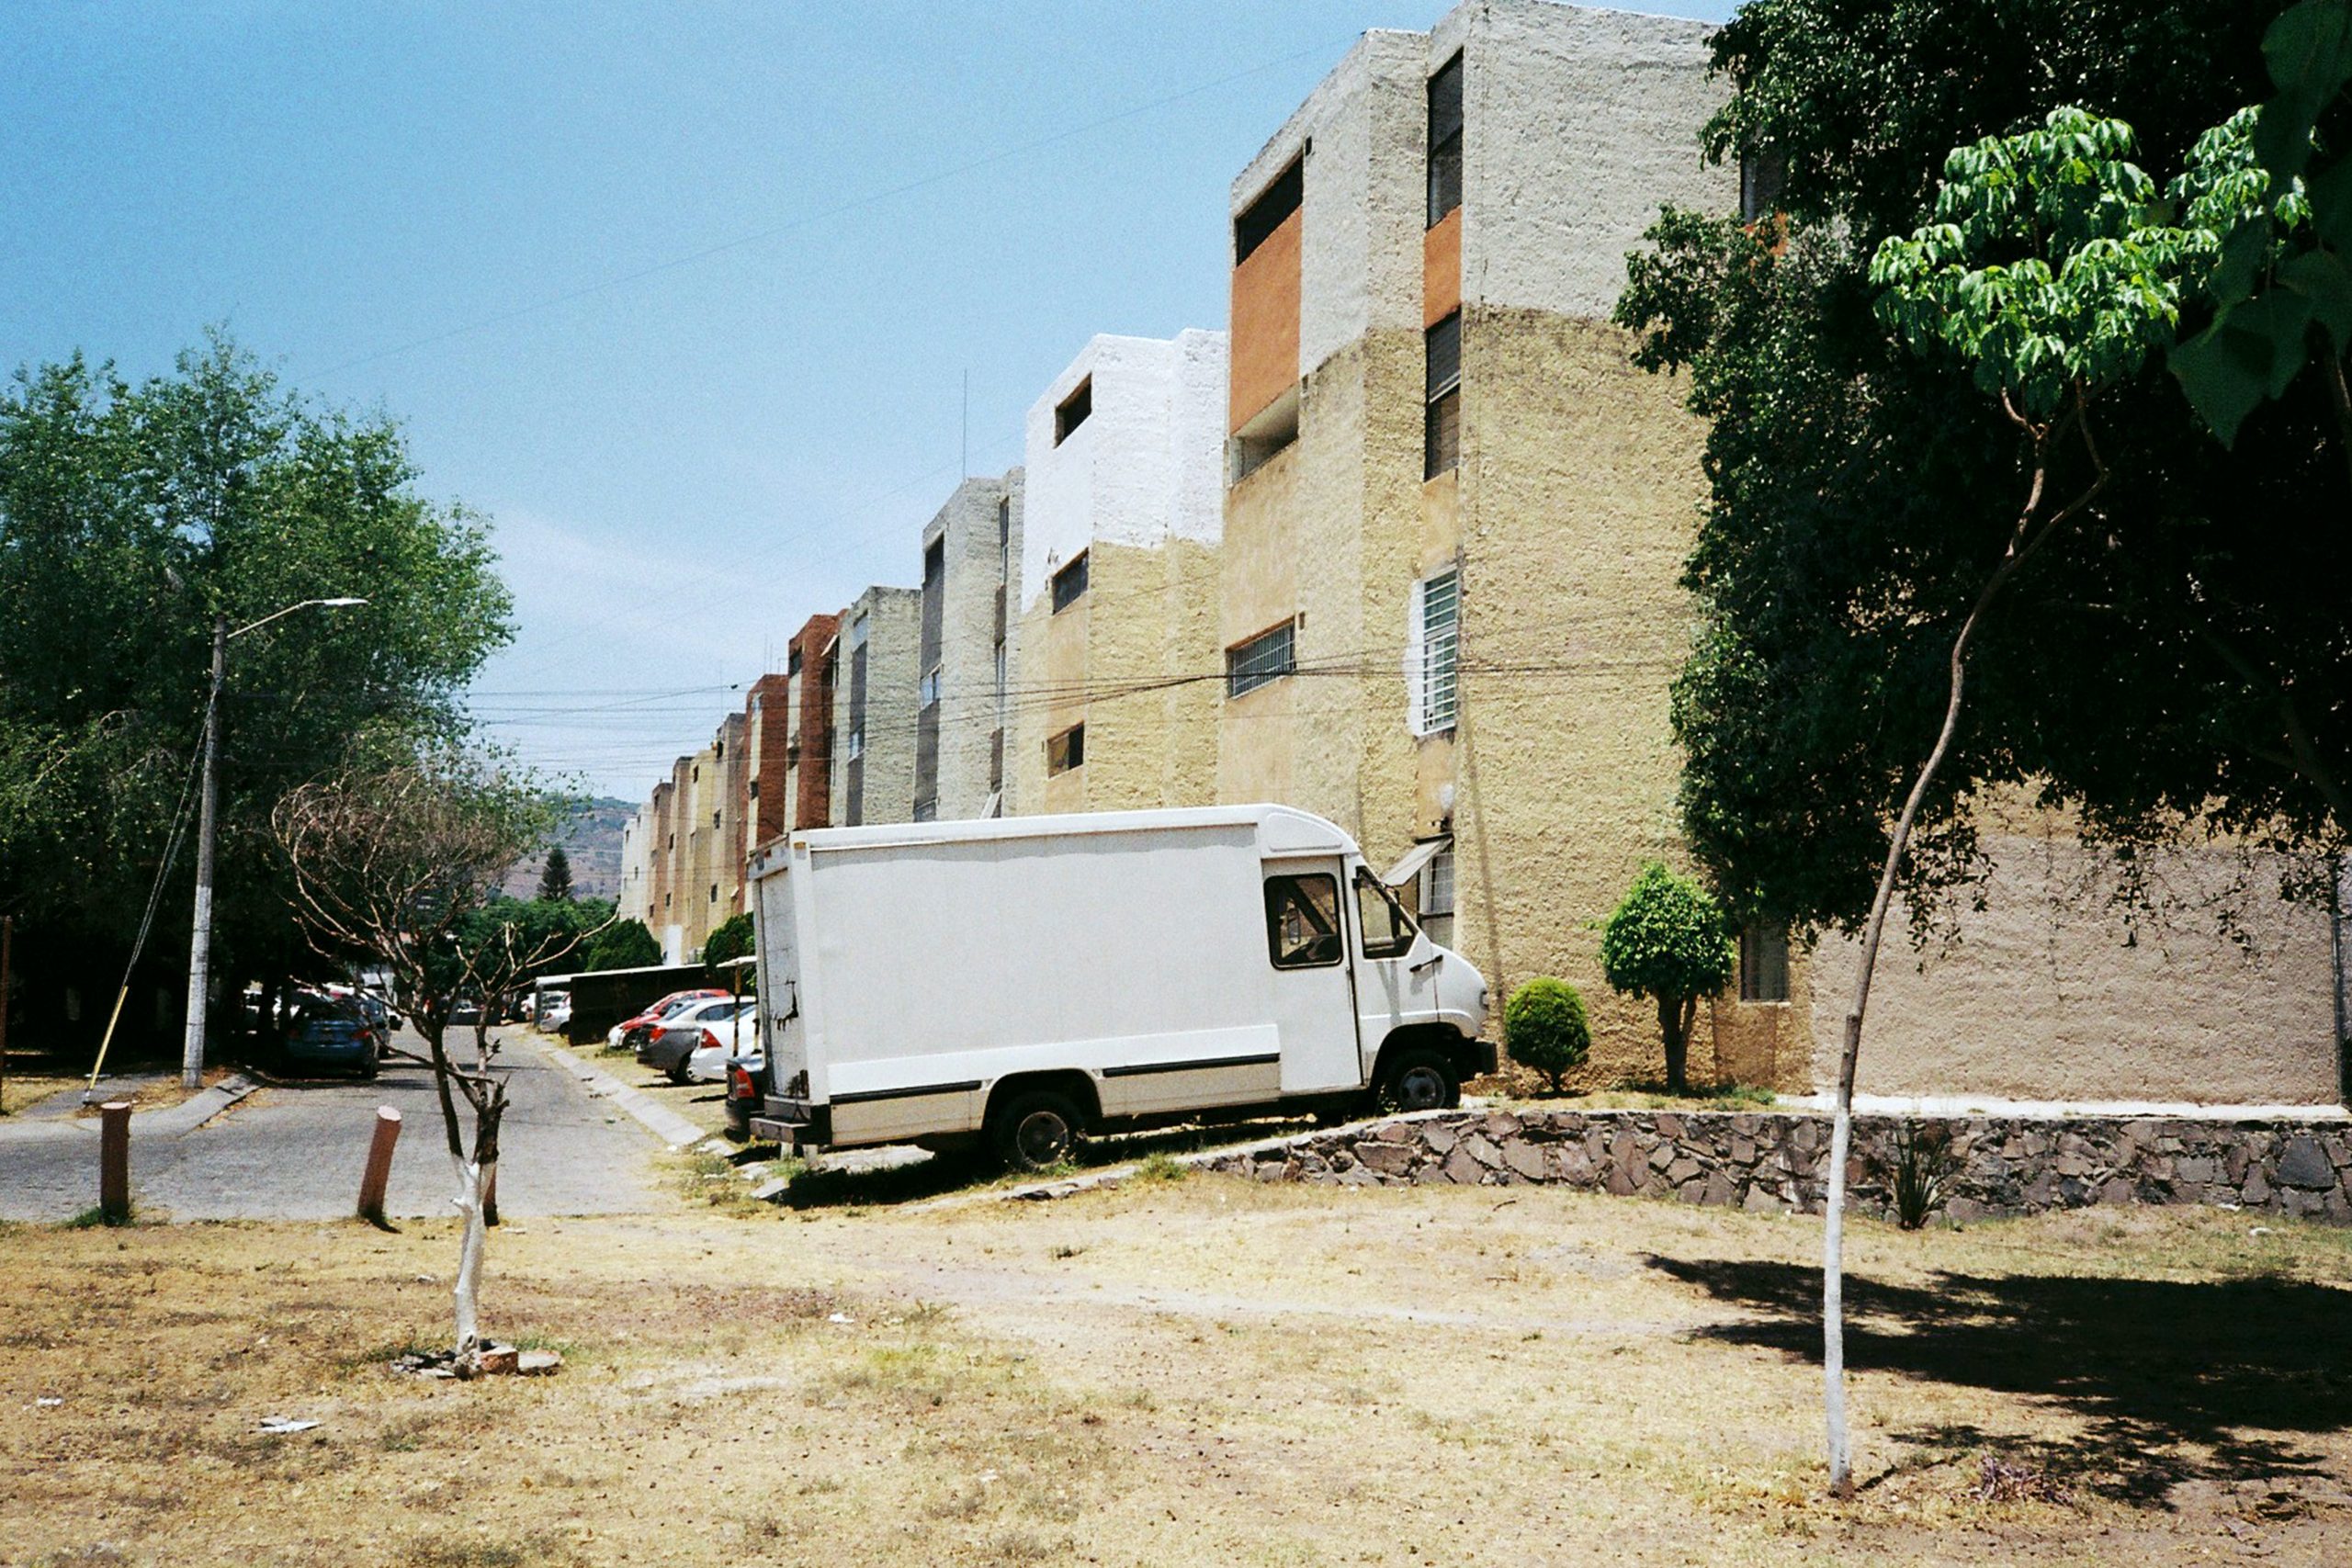 white van parked beside brown concrete building during daytime